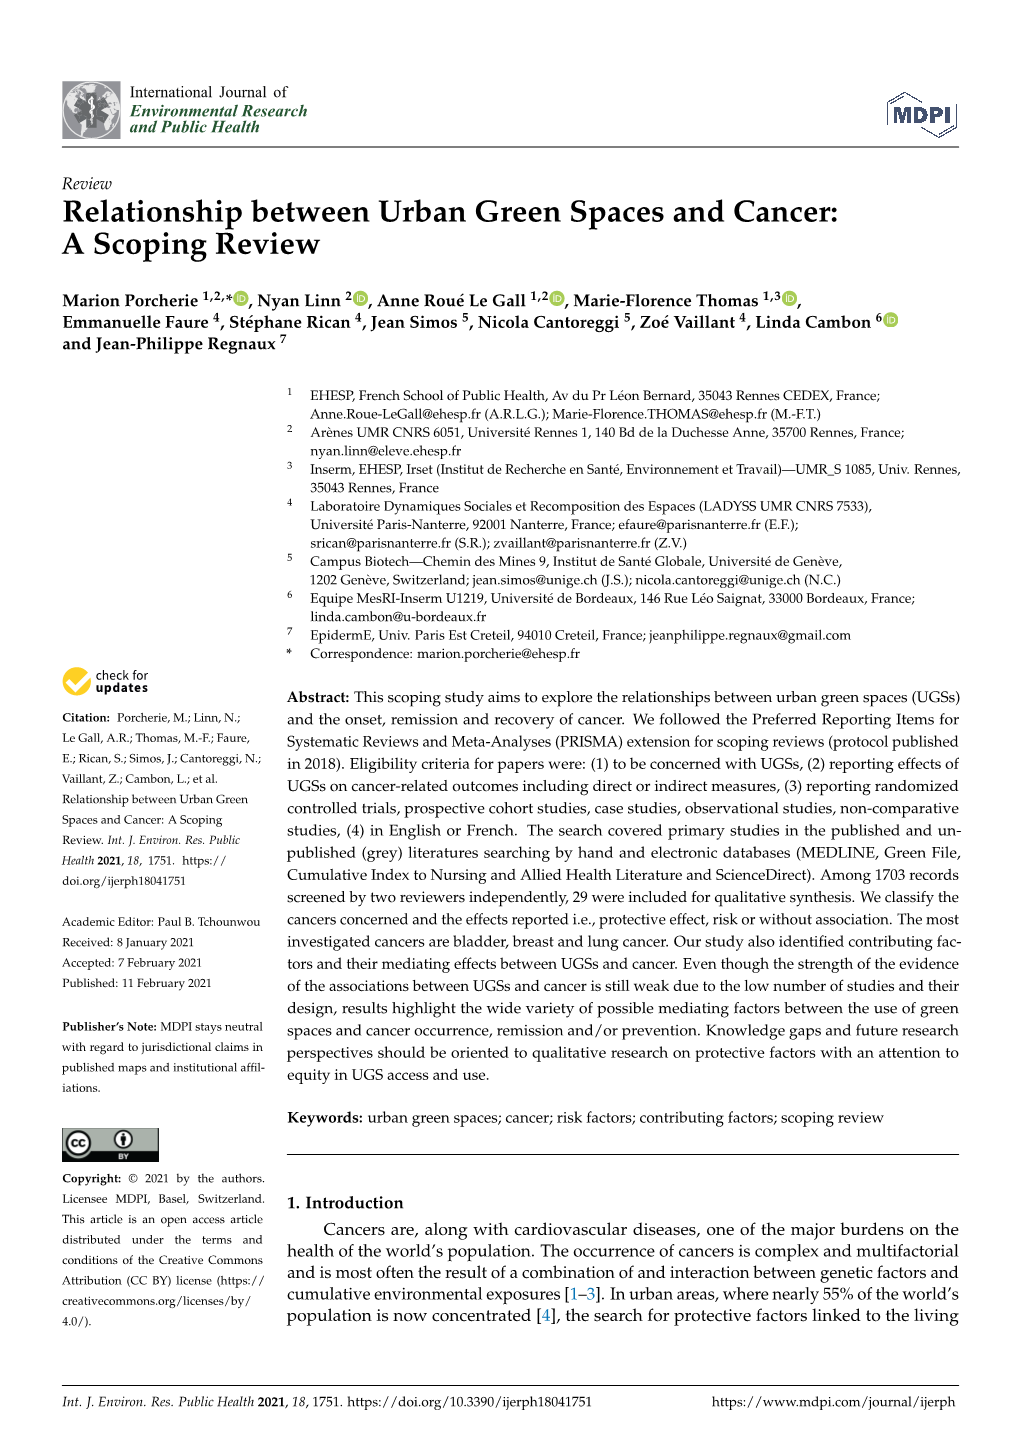 Relationship Between Urban Green Spaces and Cancer: a Scoping Review